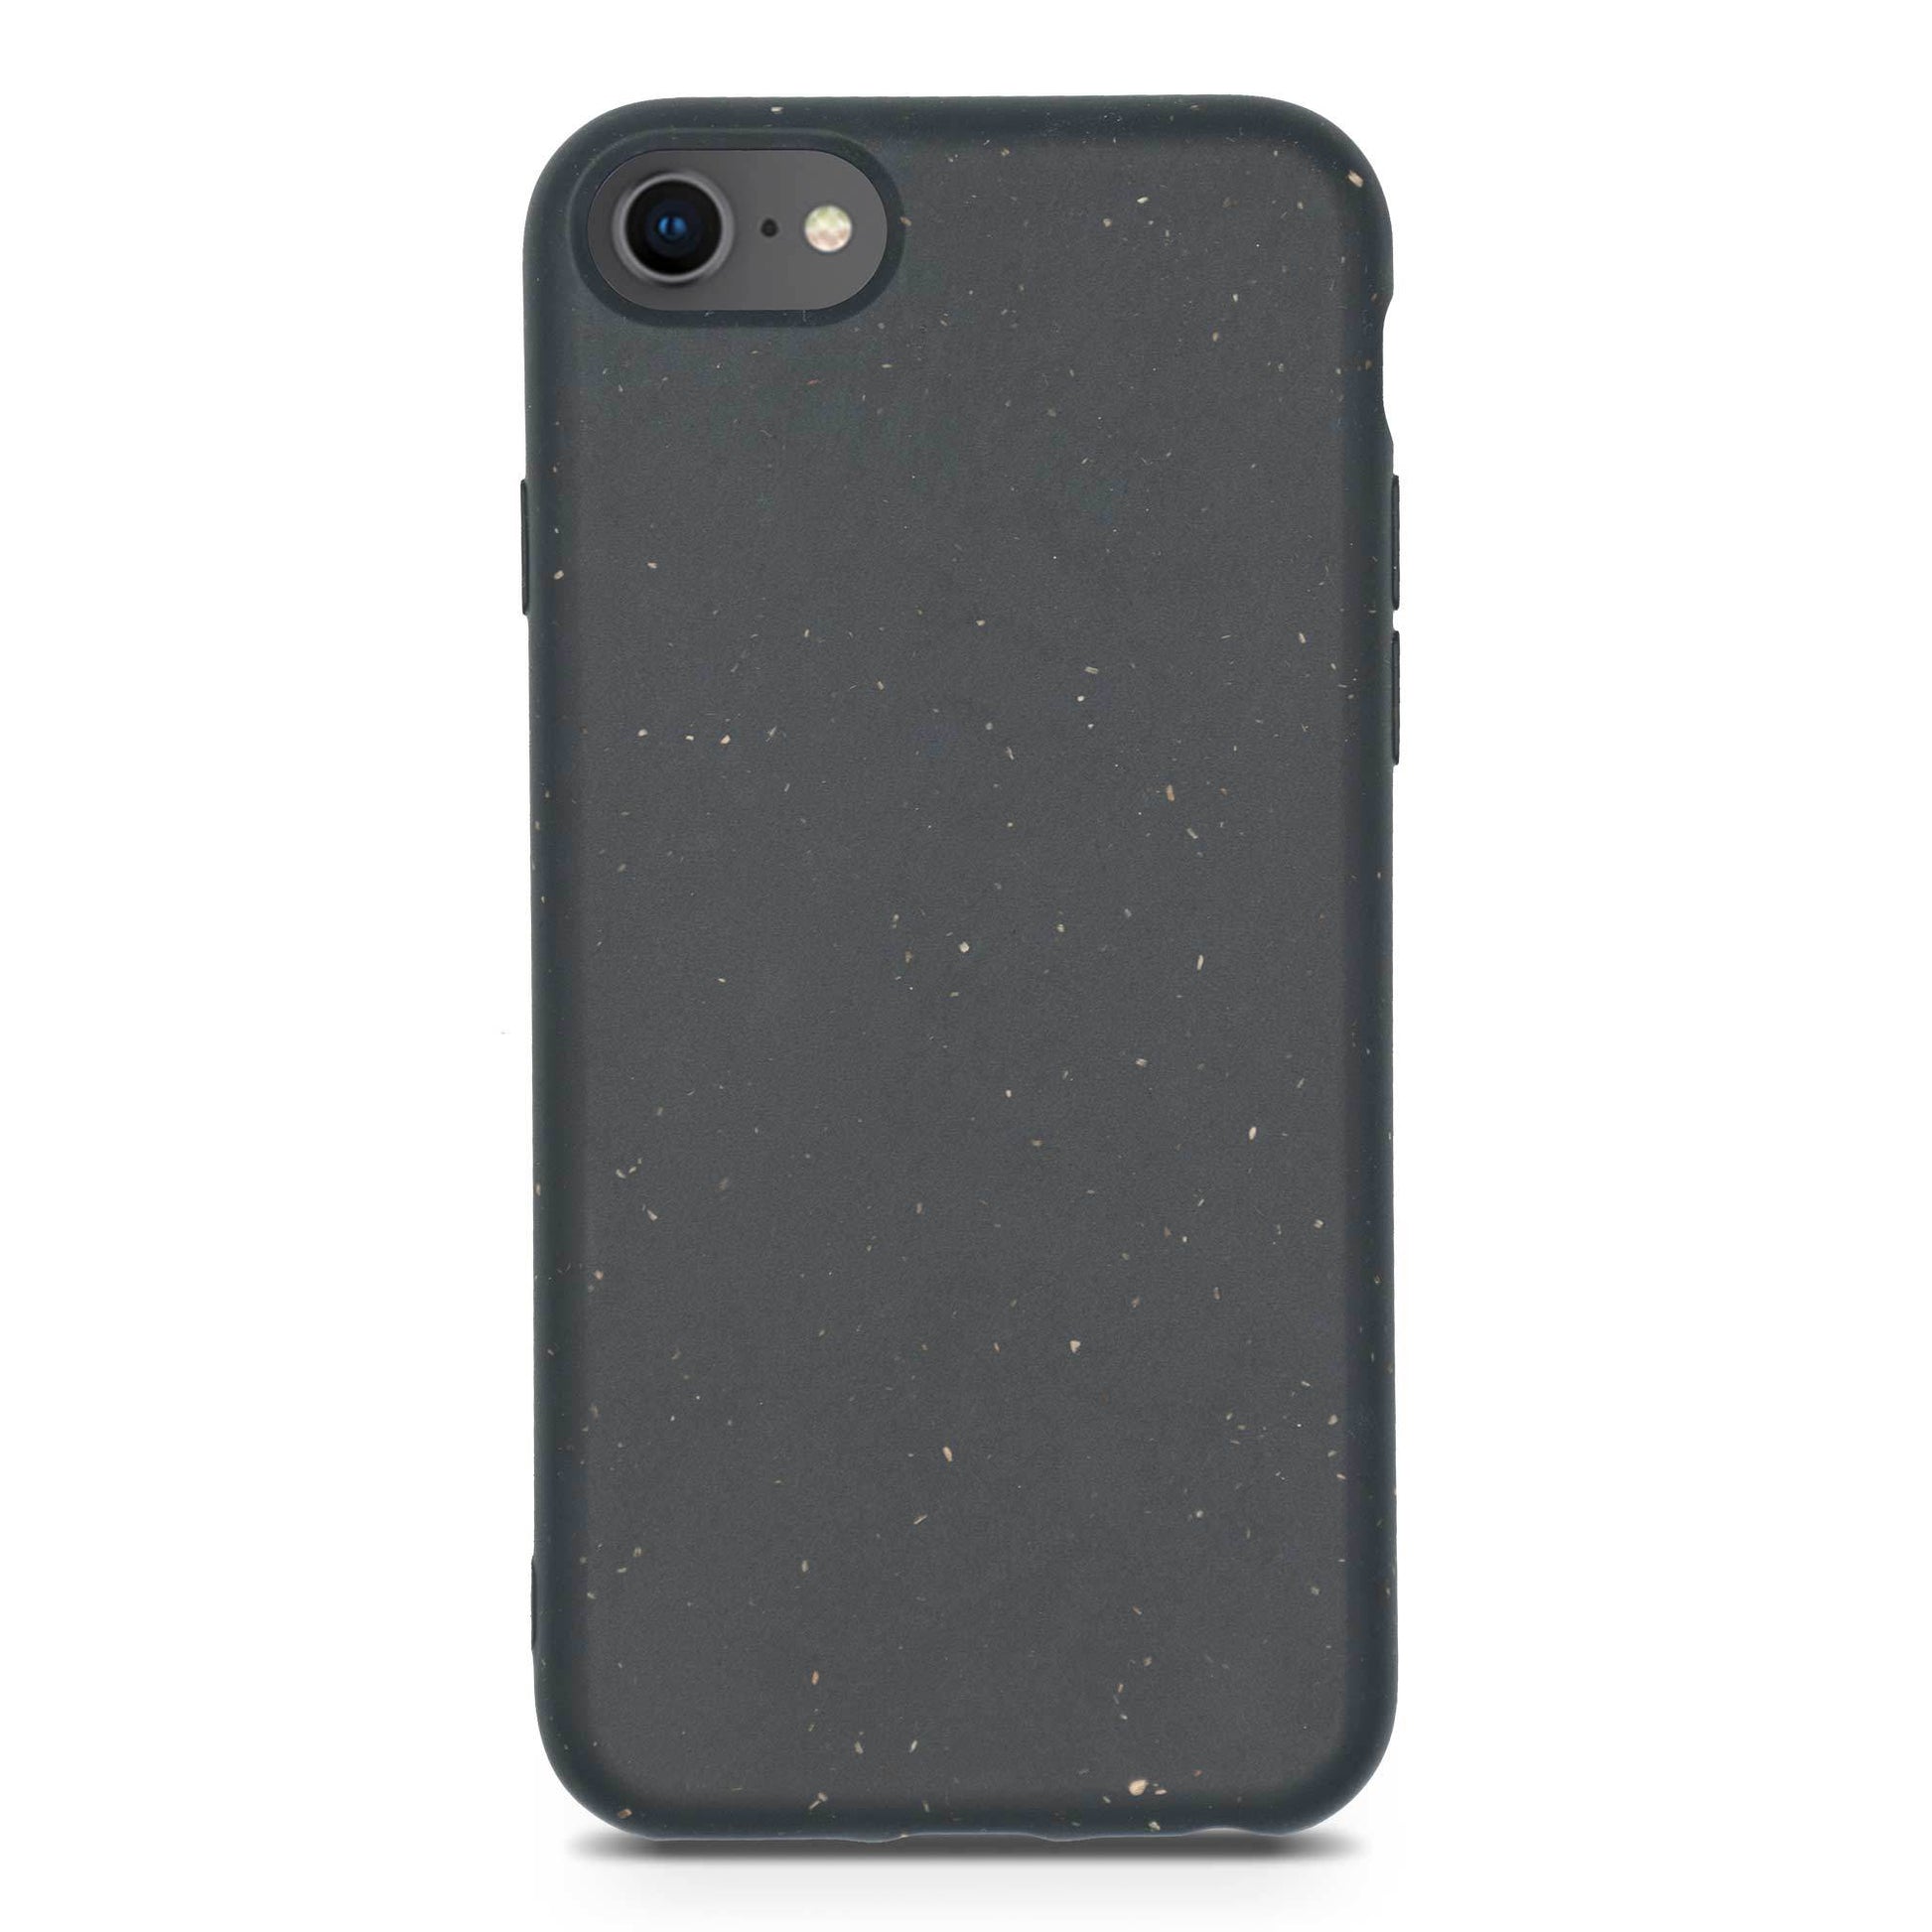 Biodegradable Personalized Phone Case - Black  100% Biodegradable, 100% Compostable, Plant-Based, Made out of wheat straw and PBAT Bioplastic (made in SGS certified non-toxic production), Attractive modern look and style, Wireless Charging and Mag Safe Compatible, Quick snap on/off, Full phone encasing, above screen lip, Access to all ports, controls and sensors, Non-slippery, and scratch-resistant, Water repellant, Nice natural, but modern look, Made in Europe.